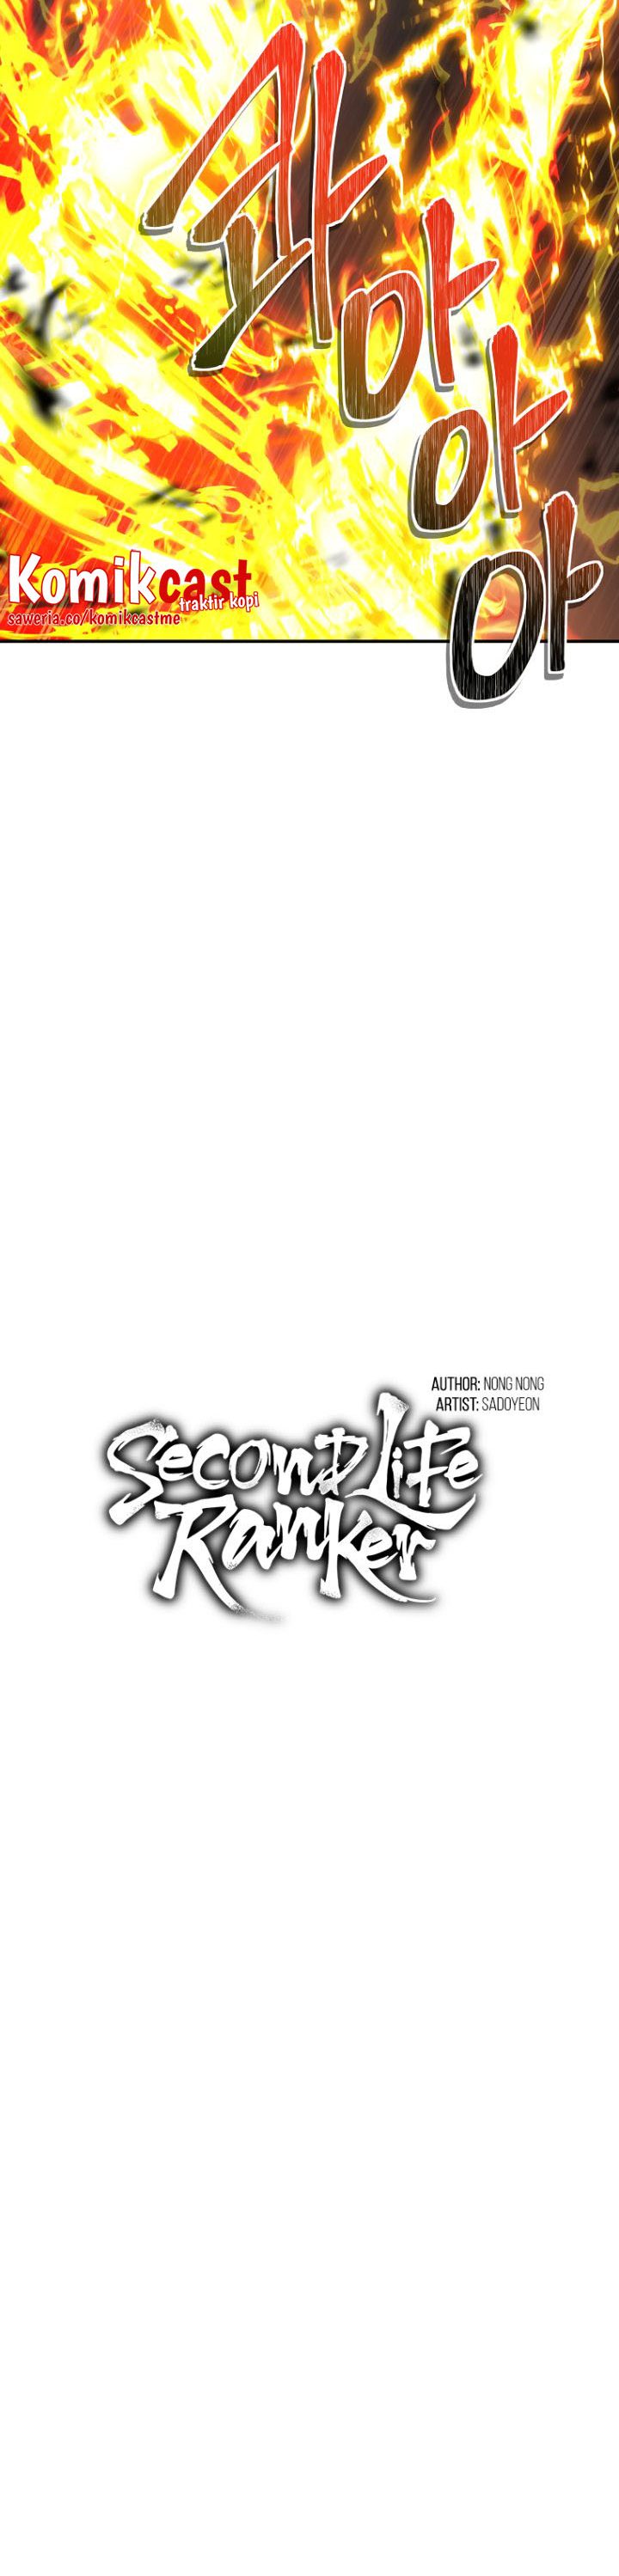 Ranker Who Lives A Second Time Chapter 127